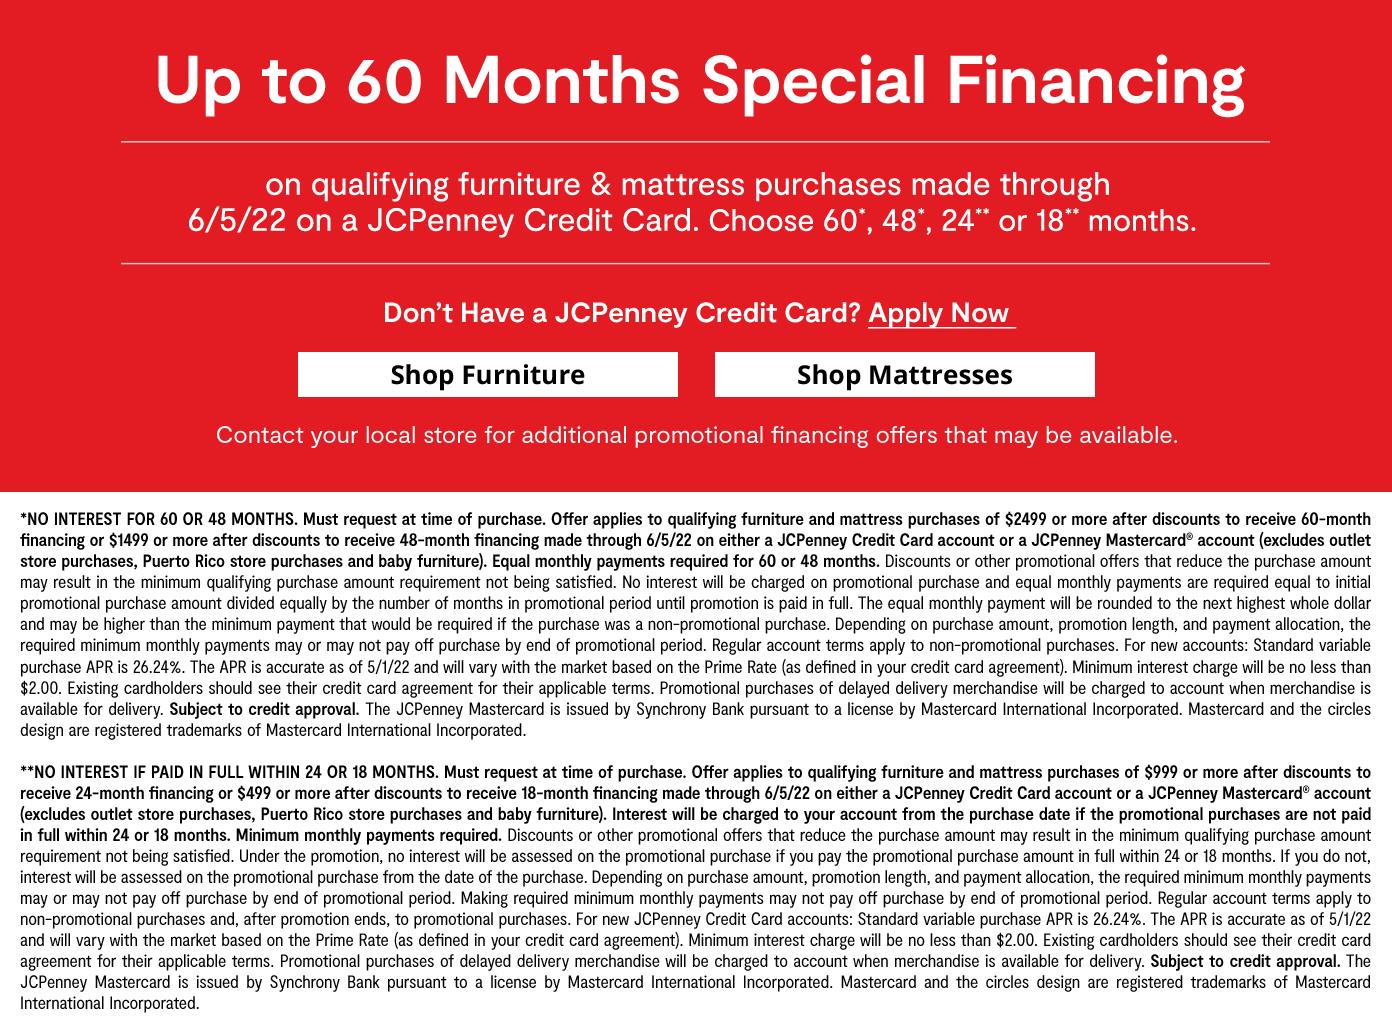 up to 60 months special financing on qualifying furniture & mattress purchases by 6/5/22 on a JCPenney credit card. learn more